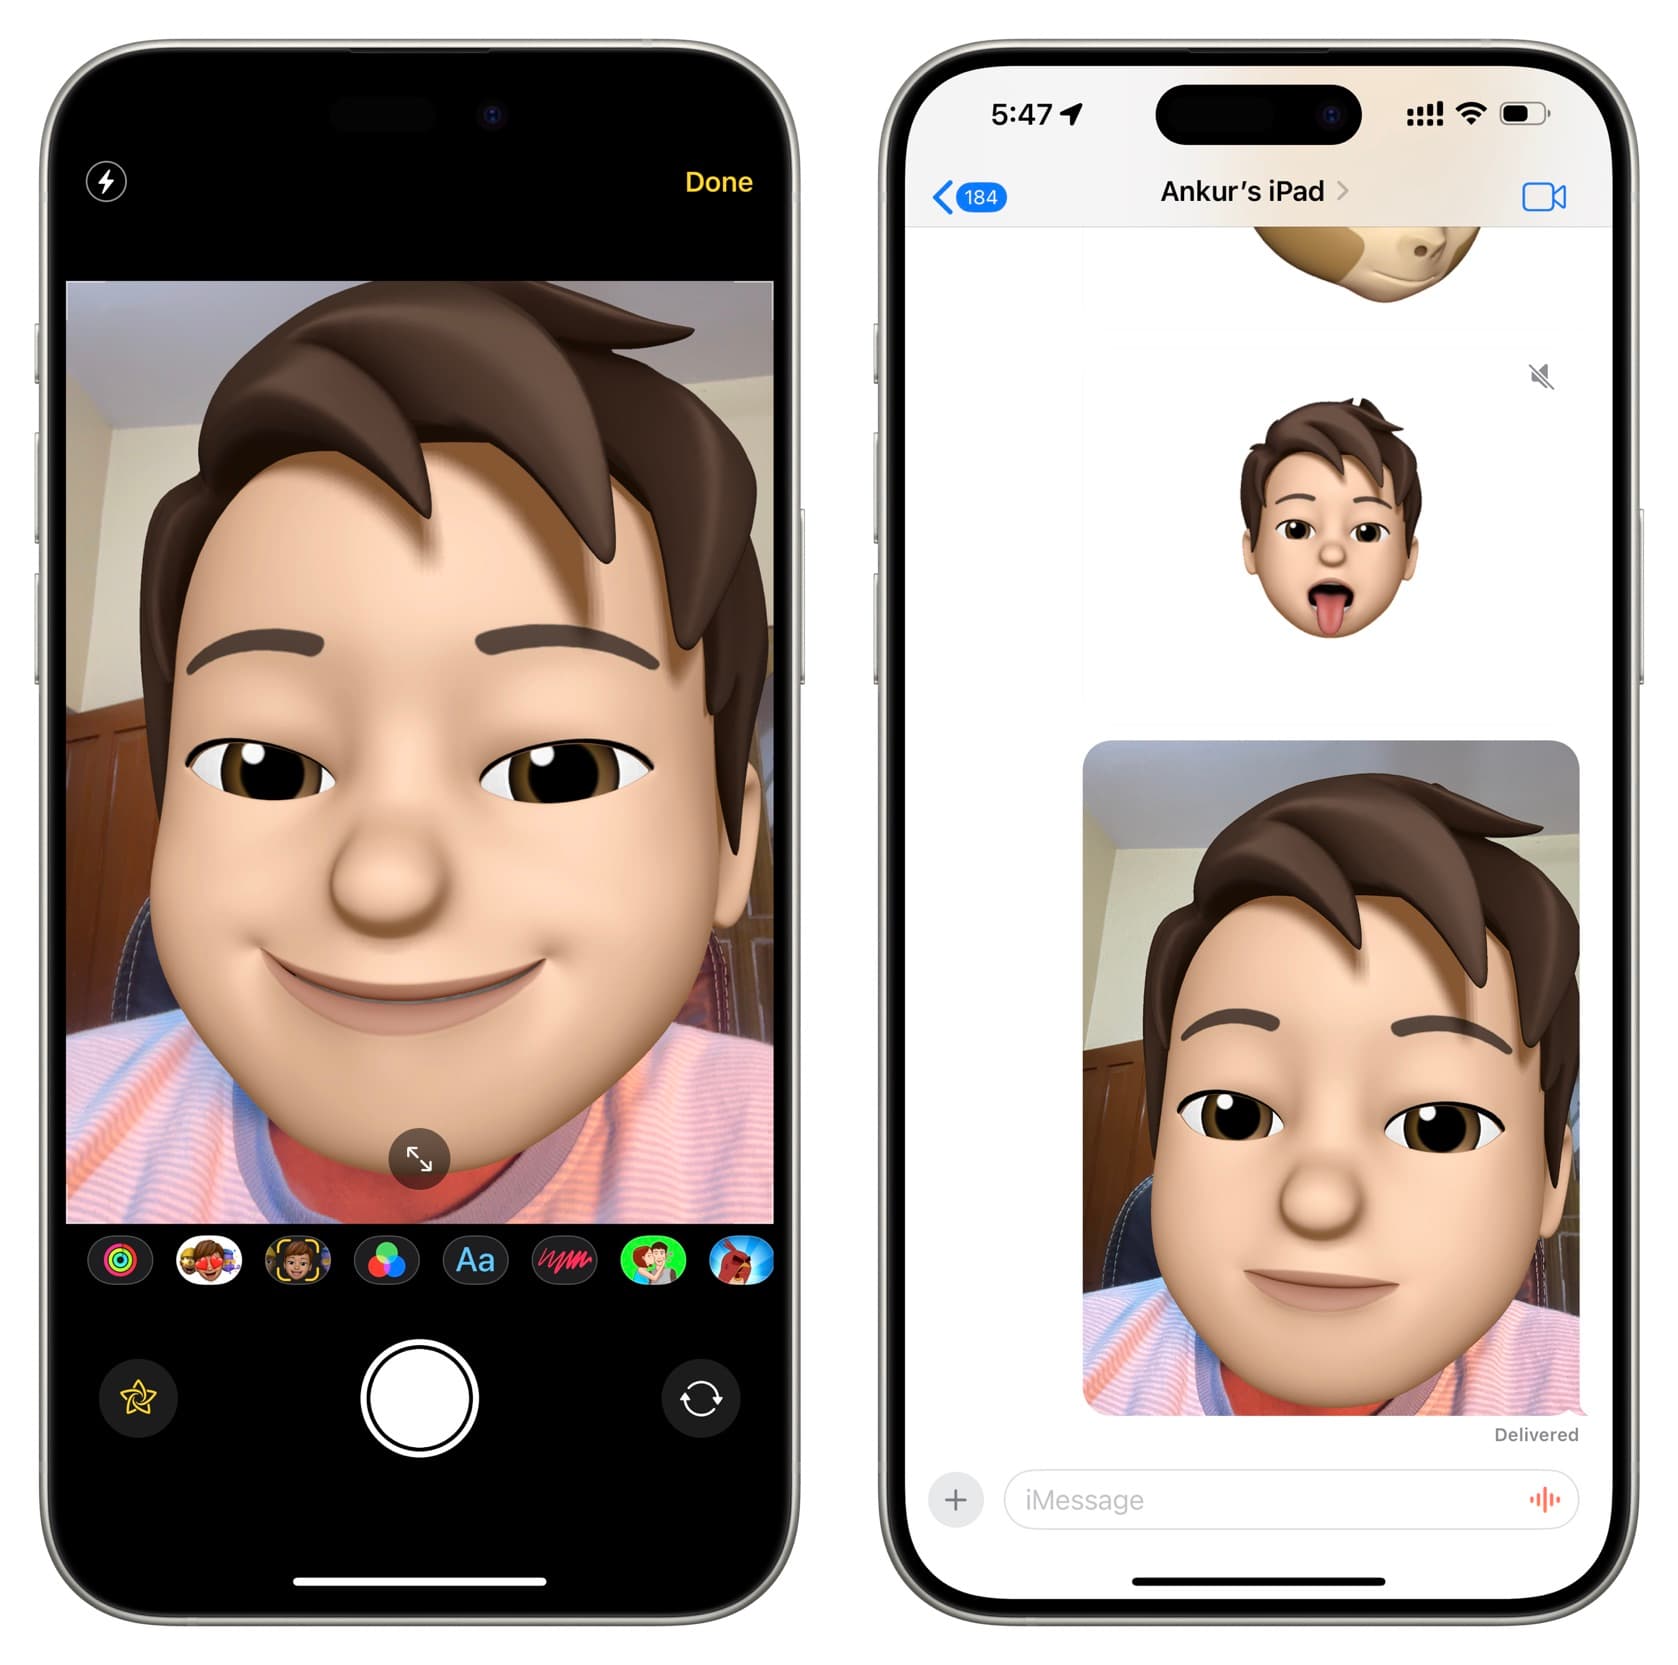 Take picture in iPhone Messages with Emoji over the face